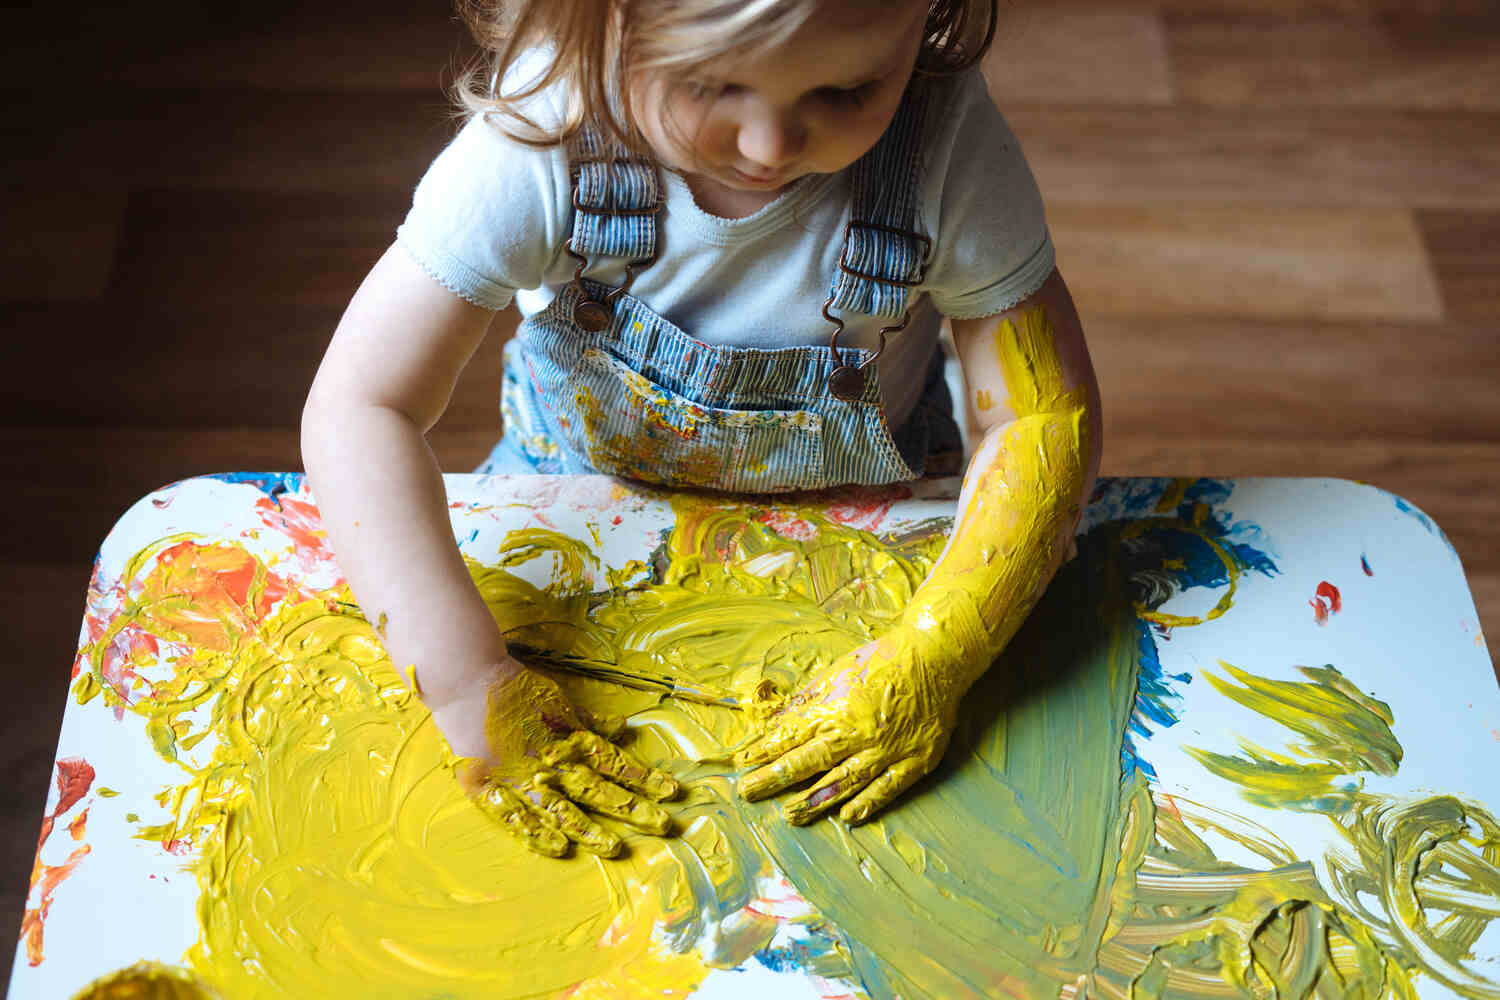 Art activities encourage toddler to use imagination